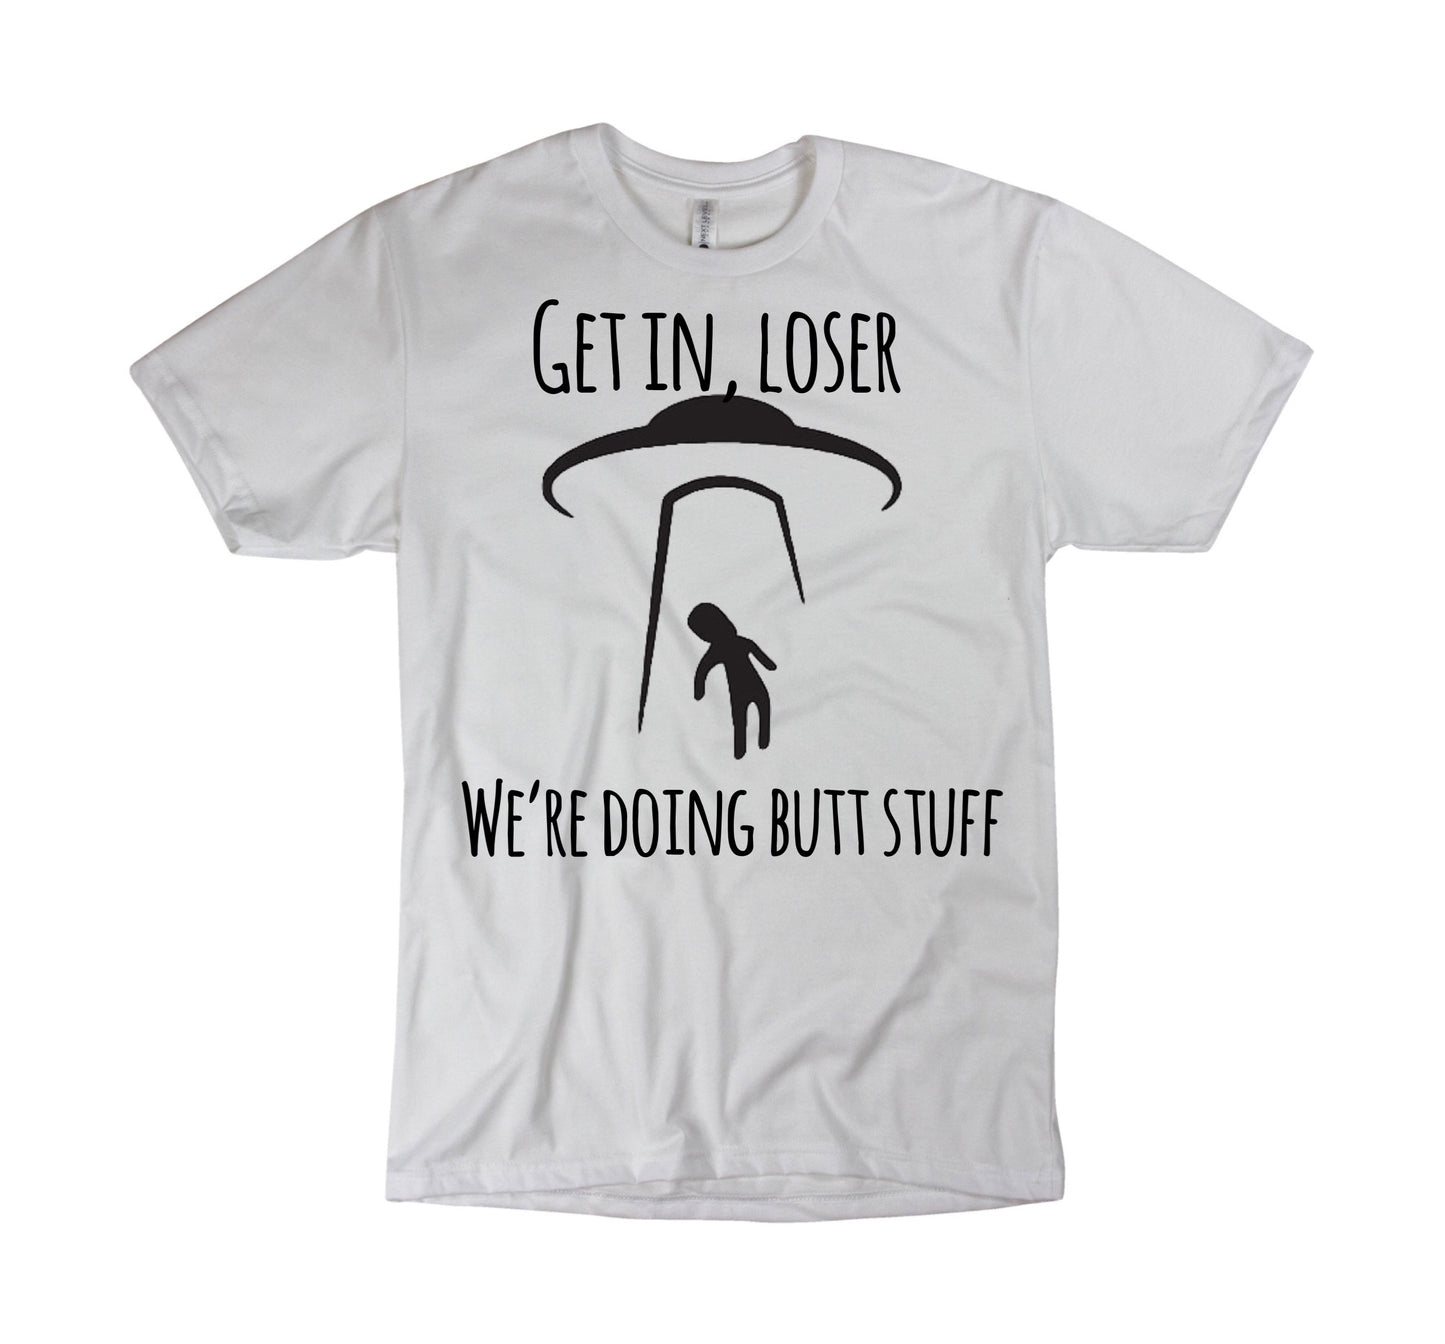 Get in loser we are doing butt stuff funny alien shirt